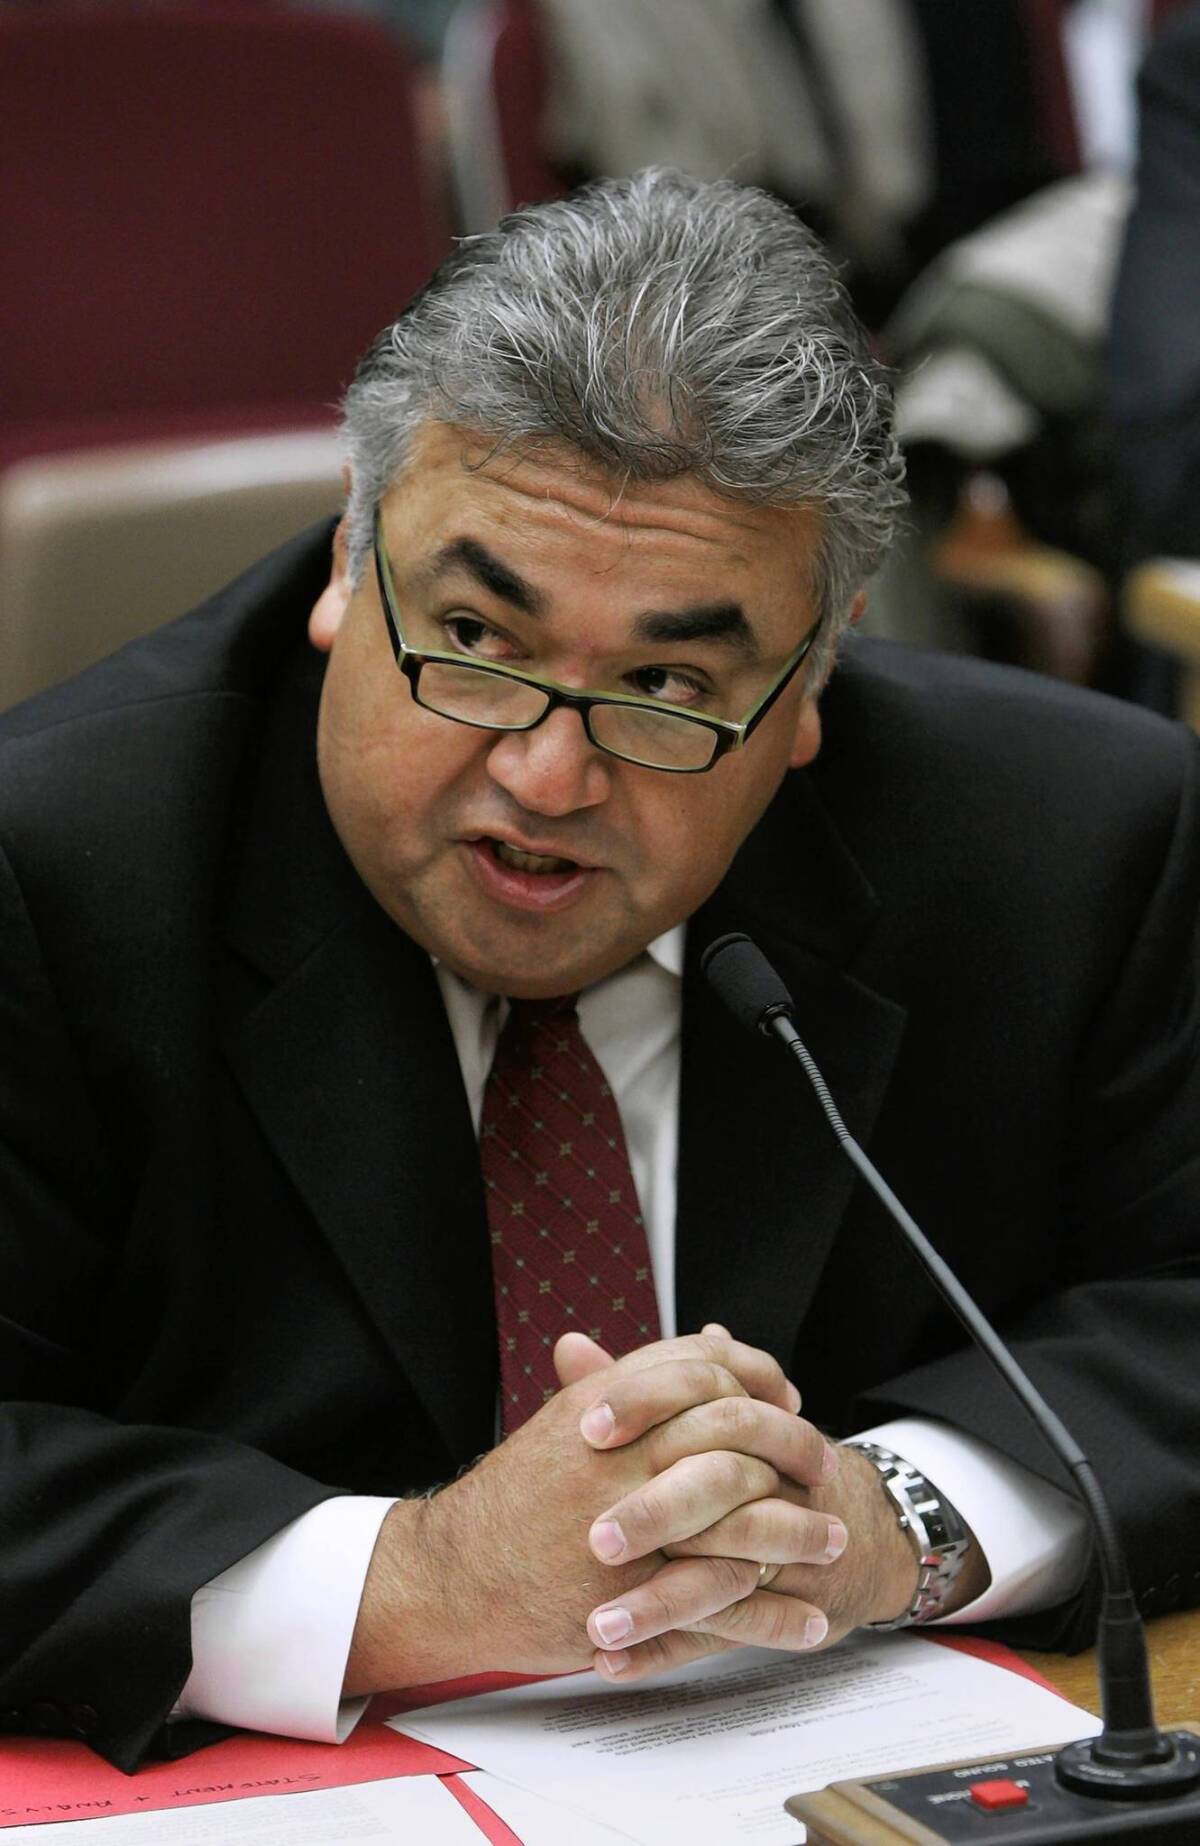 The FBI seized documents this week from the Capitol office of state Sen. Ronald S. Calderon, saying through a spokeswoman that it was "taking evidence respective to an ongoing investigation." A law enforcement source has told the Los Angeles Times that Calderon is "the focus of the investigation," which is rooted in potential corruption.